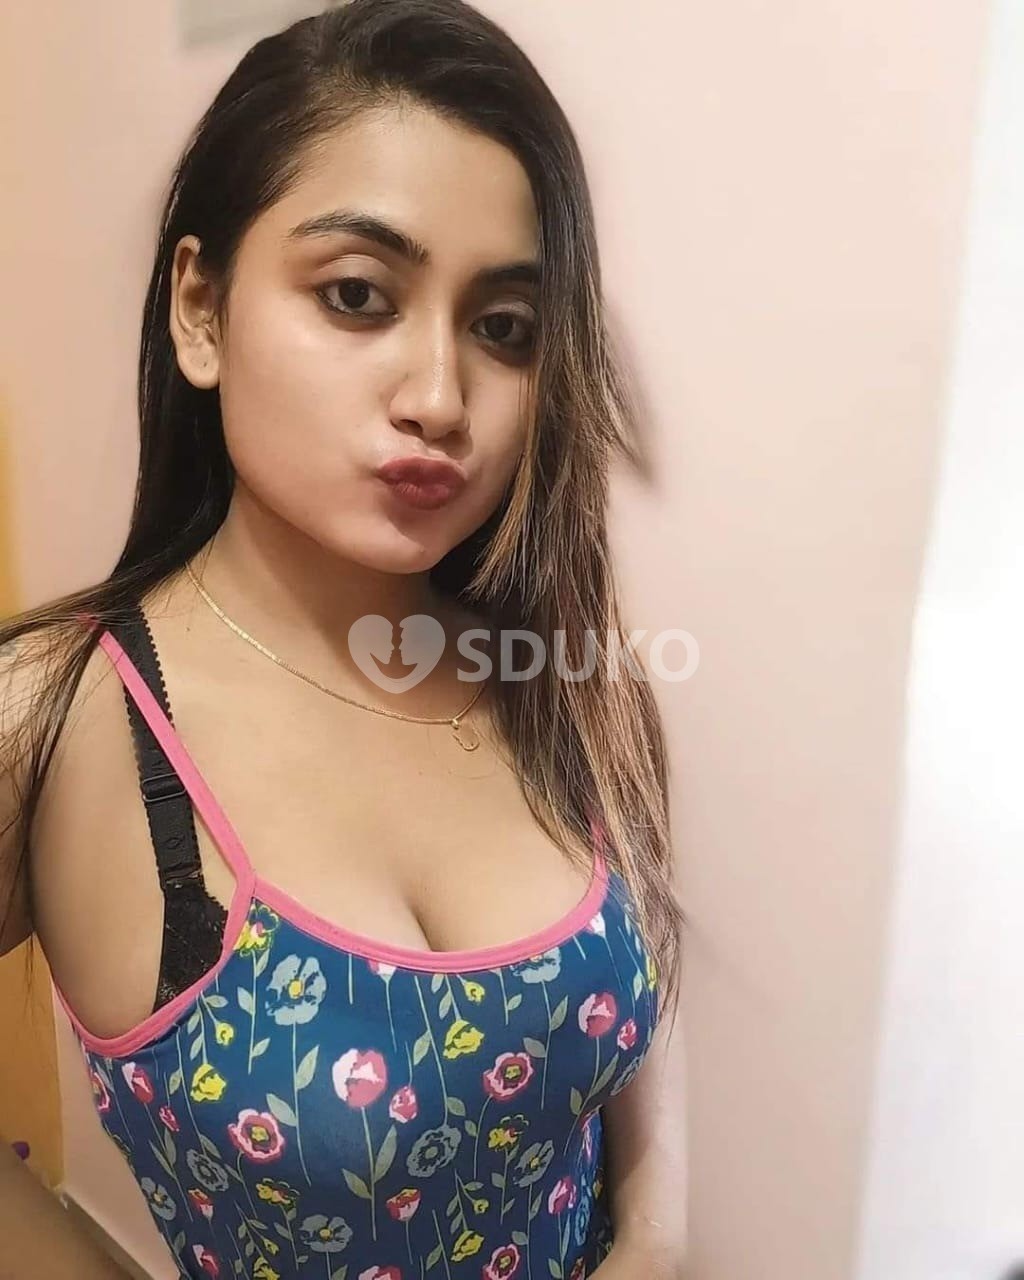 Greater Noida ❣️❣️Low price high profile college girl and aunty available any time available service genuine vip